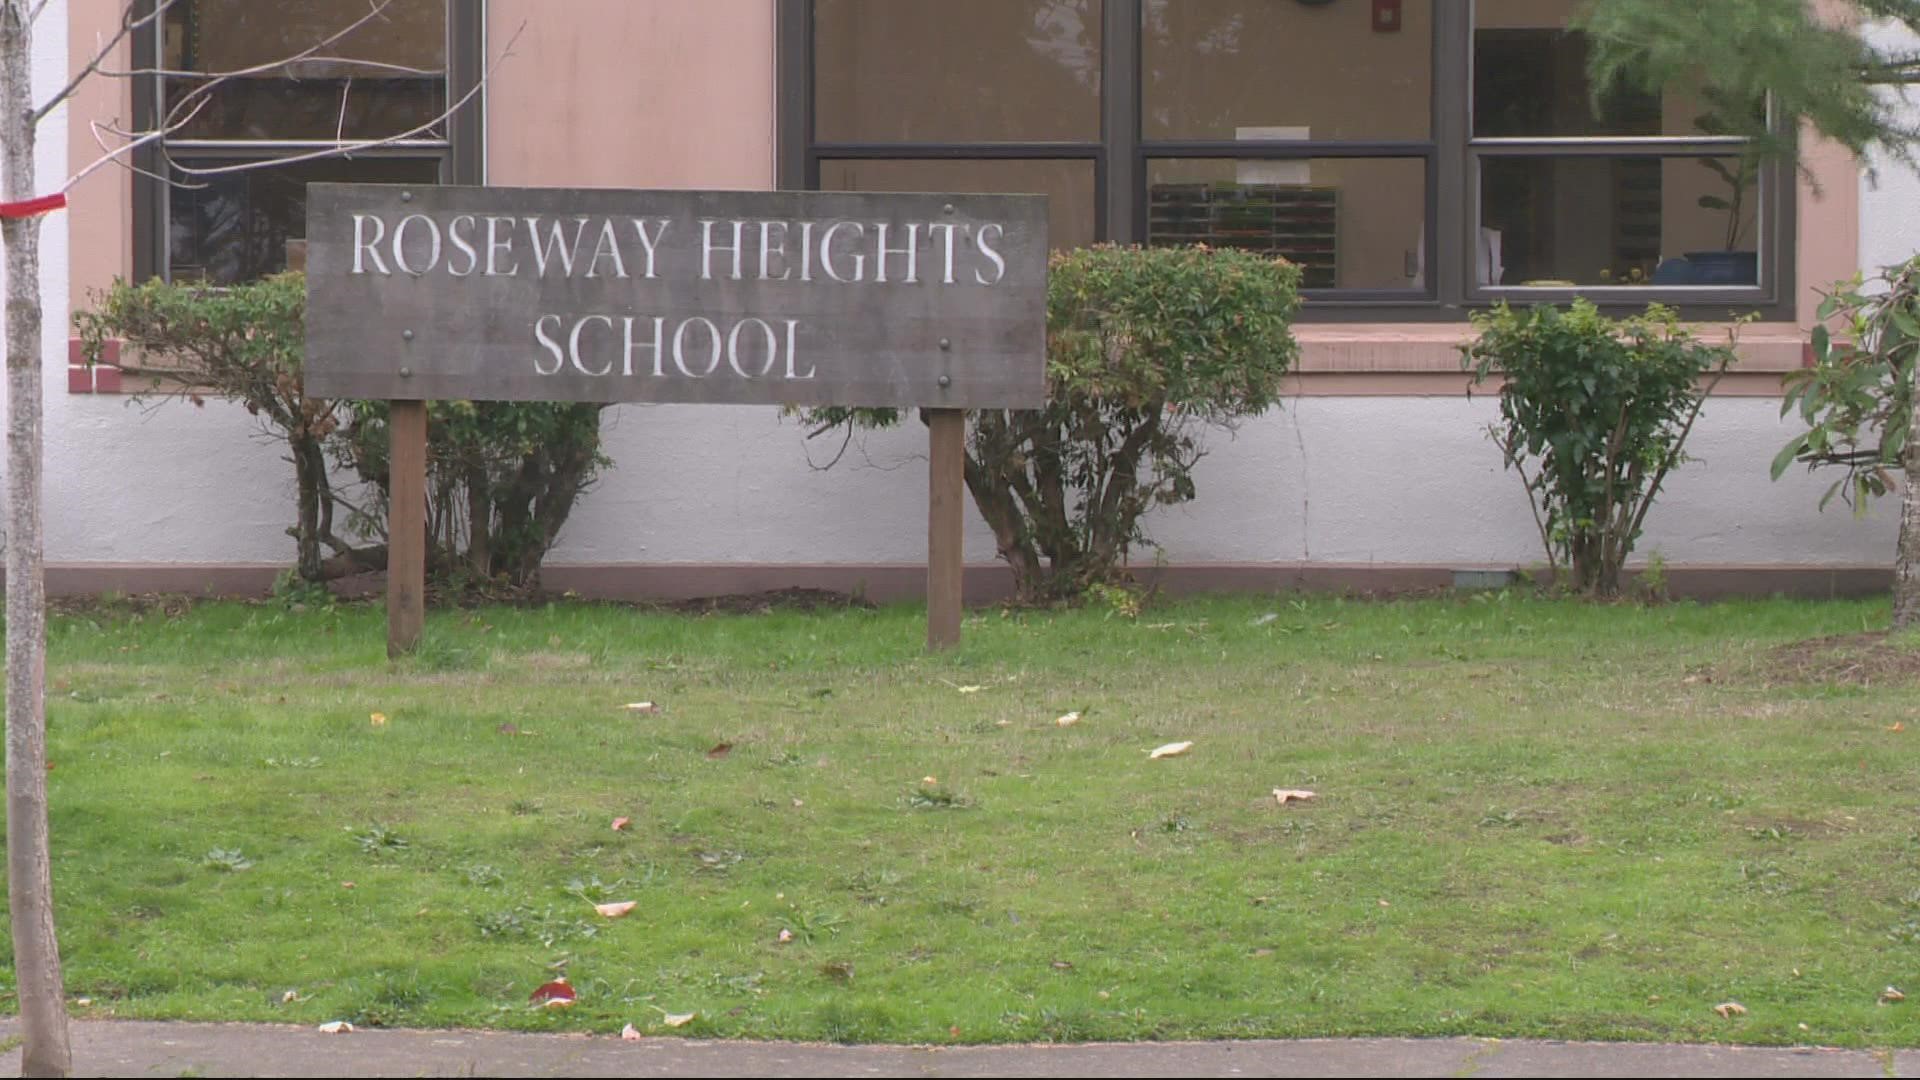 Fights broke out last week when students walked out over sexual harassment and racism concerns. The school said staff will also meet with parents.